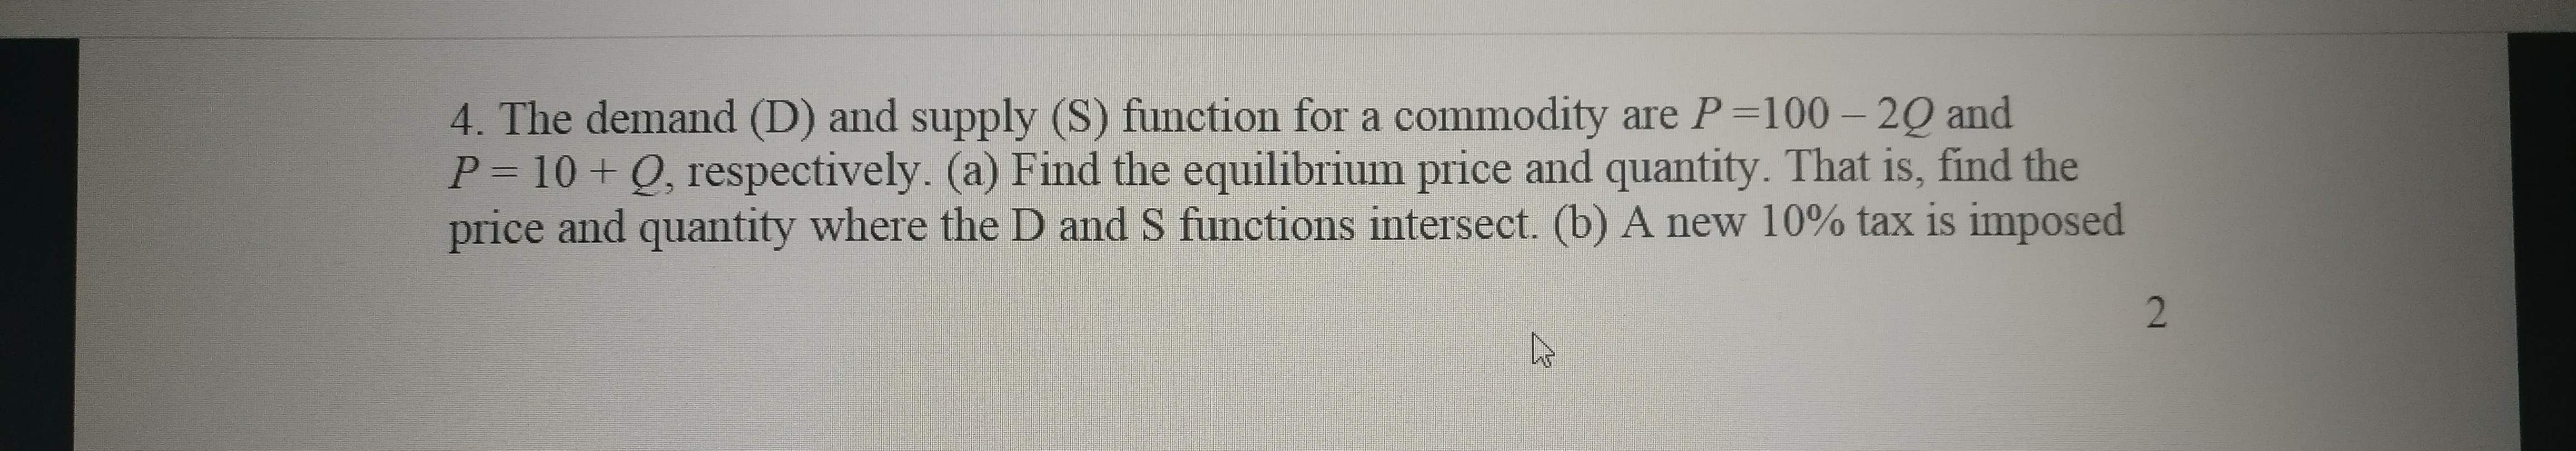 4. The demand (D) and supply (S) function for a commodity are P=100 – 2Q and
P= 10+ Q, respectively. (a) Find the equilibrium price and quantity. That is, find the
price and quantity where the D and S functions intersect. (b) A new 10% tax is imposed
